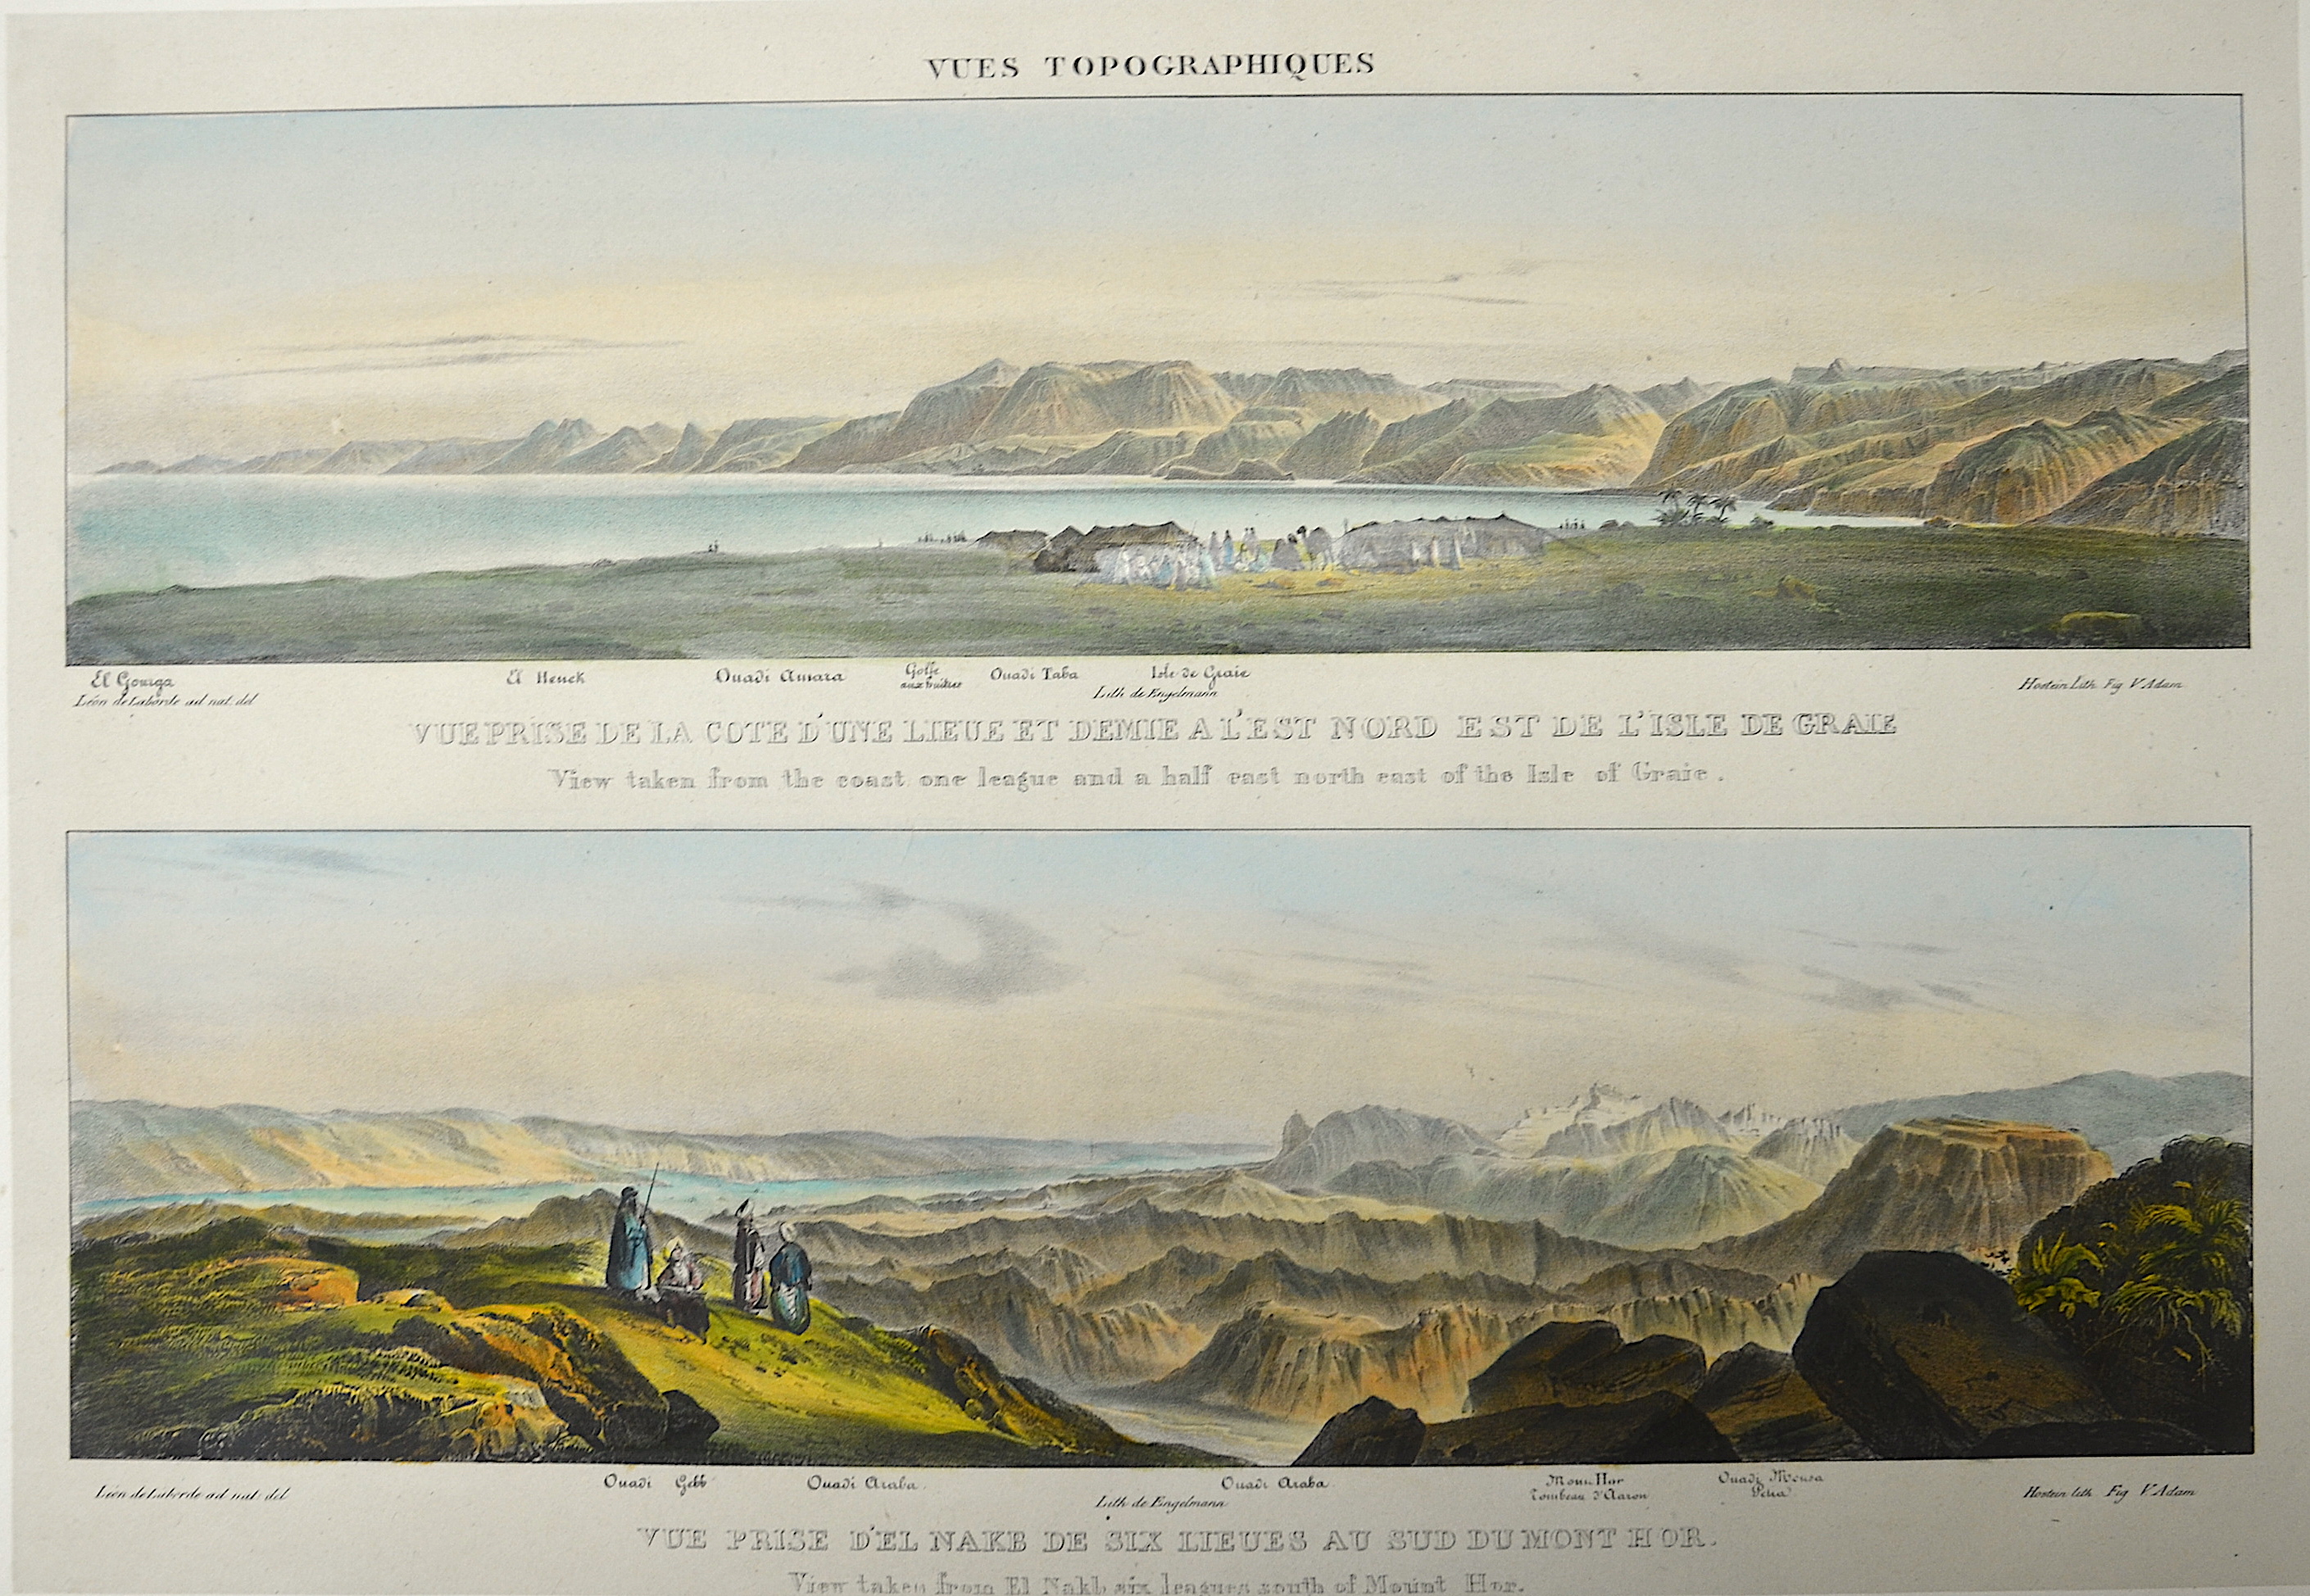 Engelmann Godefroy View taken from the coast one league and a half east north-east of the isle of Graie/View taken from L Nakb six leagues sout of Mount Hor